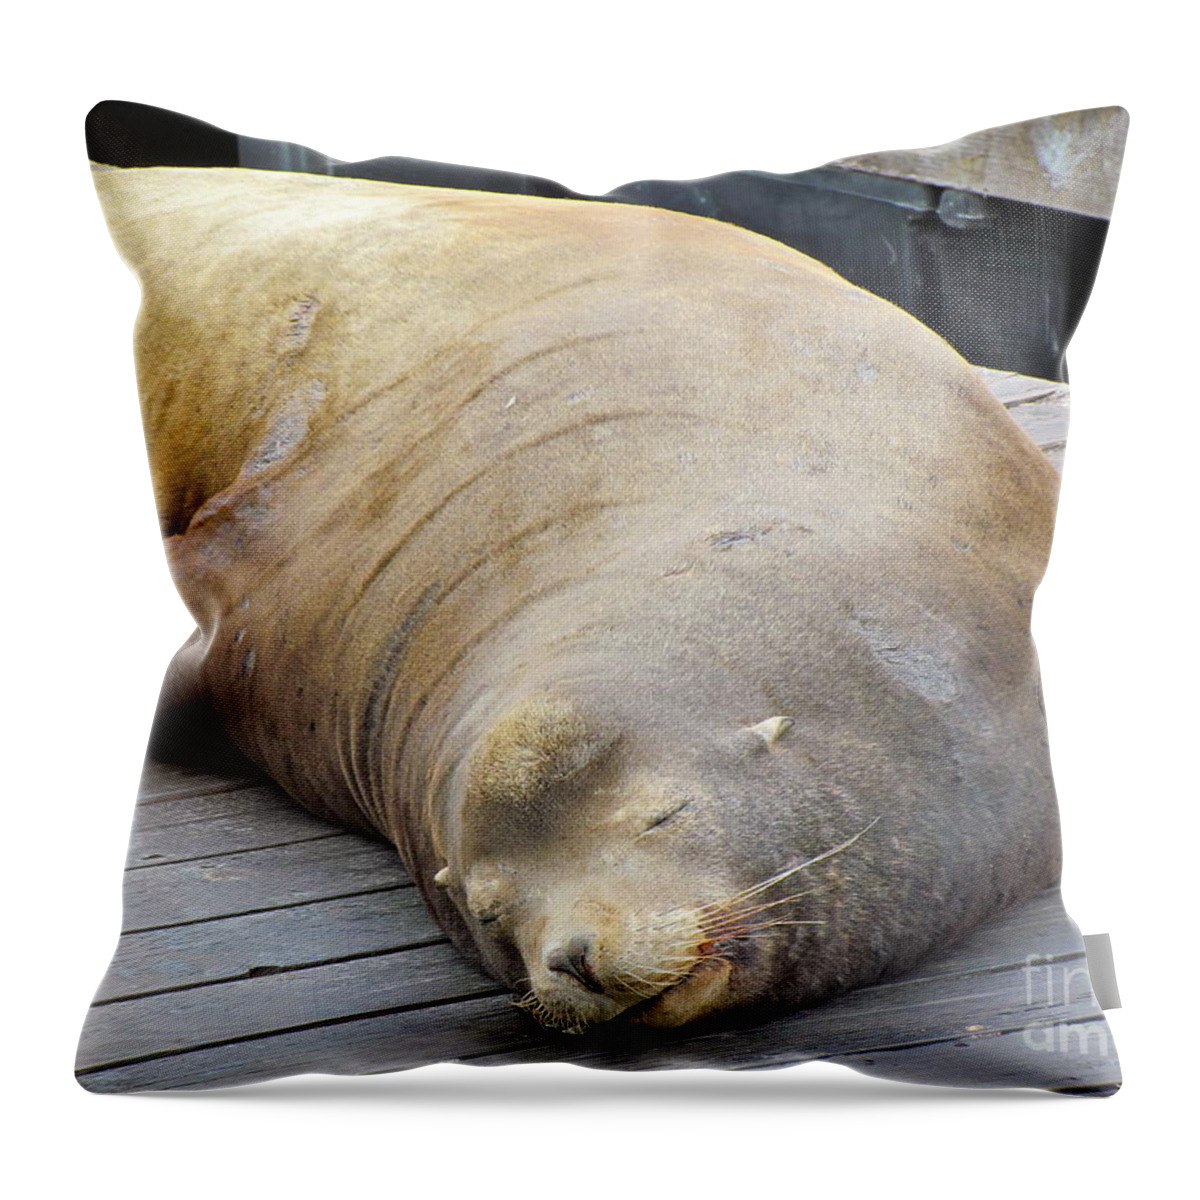 Adorable Throw Pillow featuring the photograph Sleepy Sea Lion by Beth Saffer